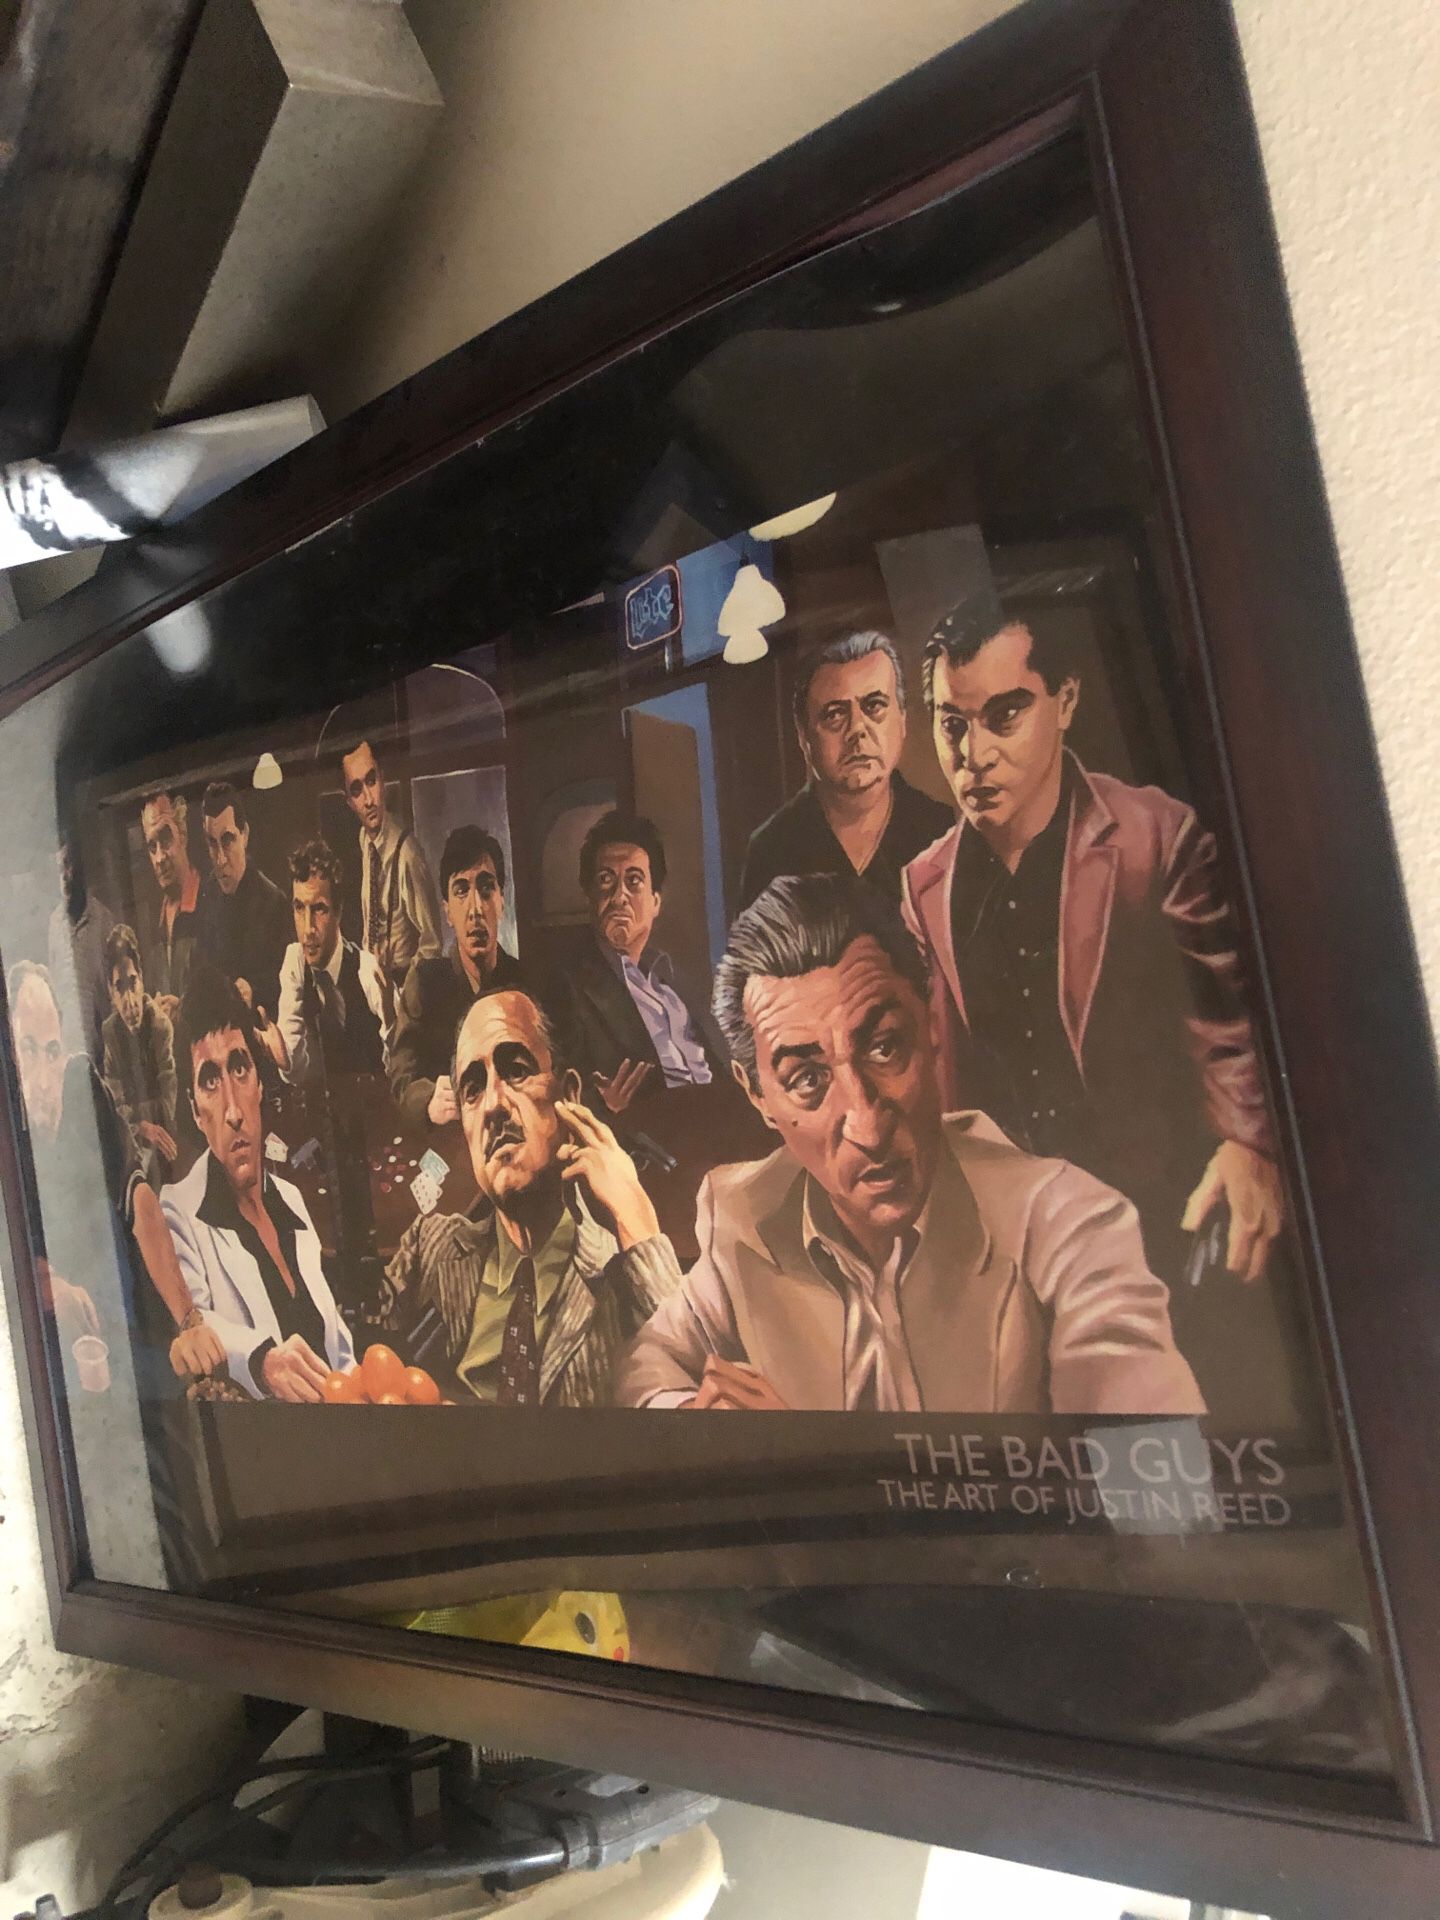 The bad guys by Justin Reed. Framed poster